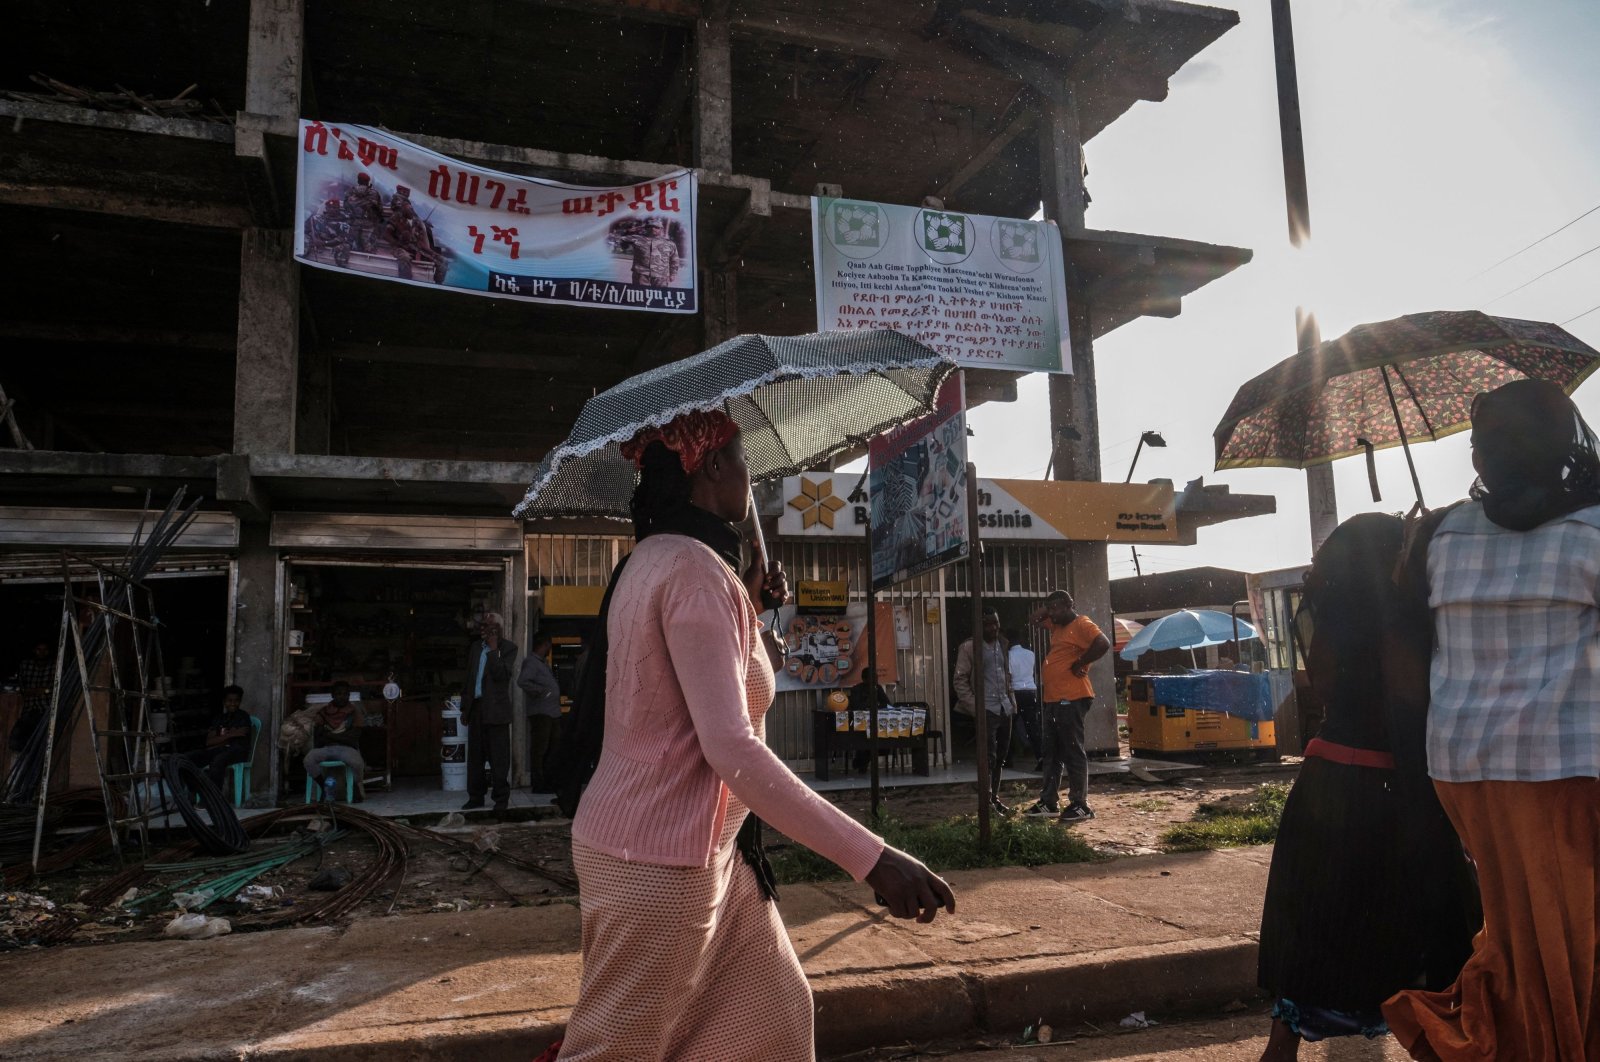 Women with umbrellas walk in front of a sign inviting to vote in a referendum in order to create a new state in southern Ethiopia (R) and a banner inviting to join the army, in the town of Bonga, 100 kilometers southwest of the city of Jimma, Ethiopia, on Aug. 17, 2021. (AFP Photo)